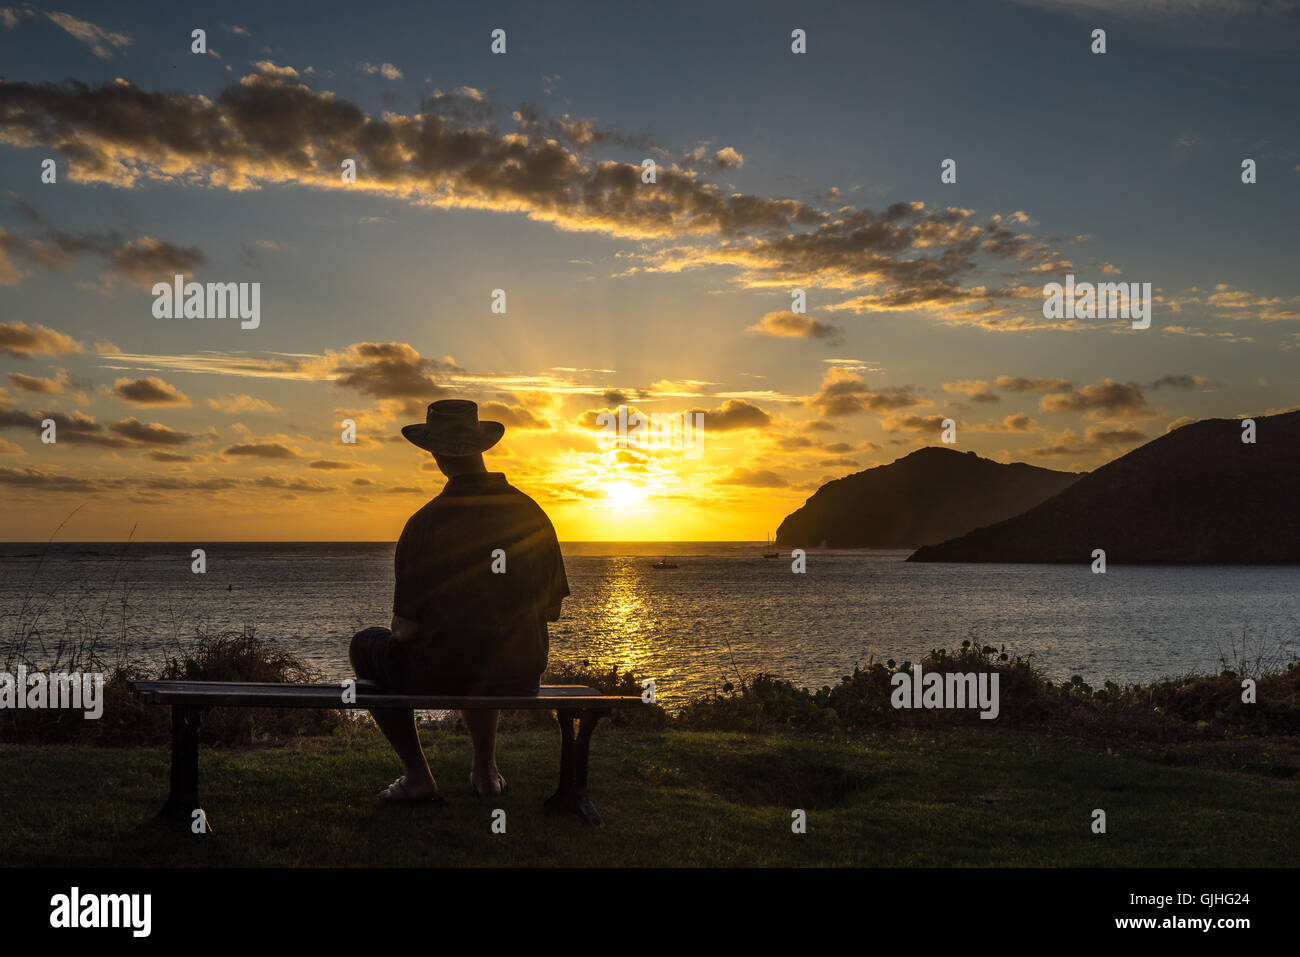 Silhouette of man looking at sunset, Lord Howe Island, New South Wales, Australie Banque D'Images